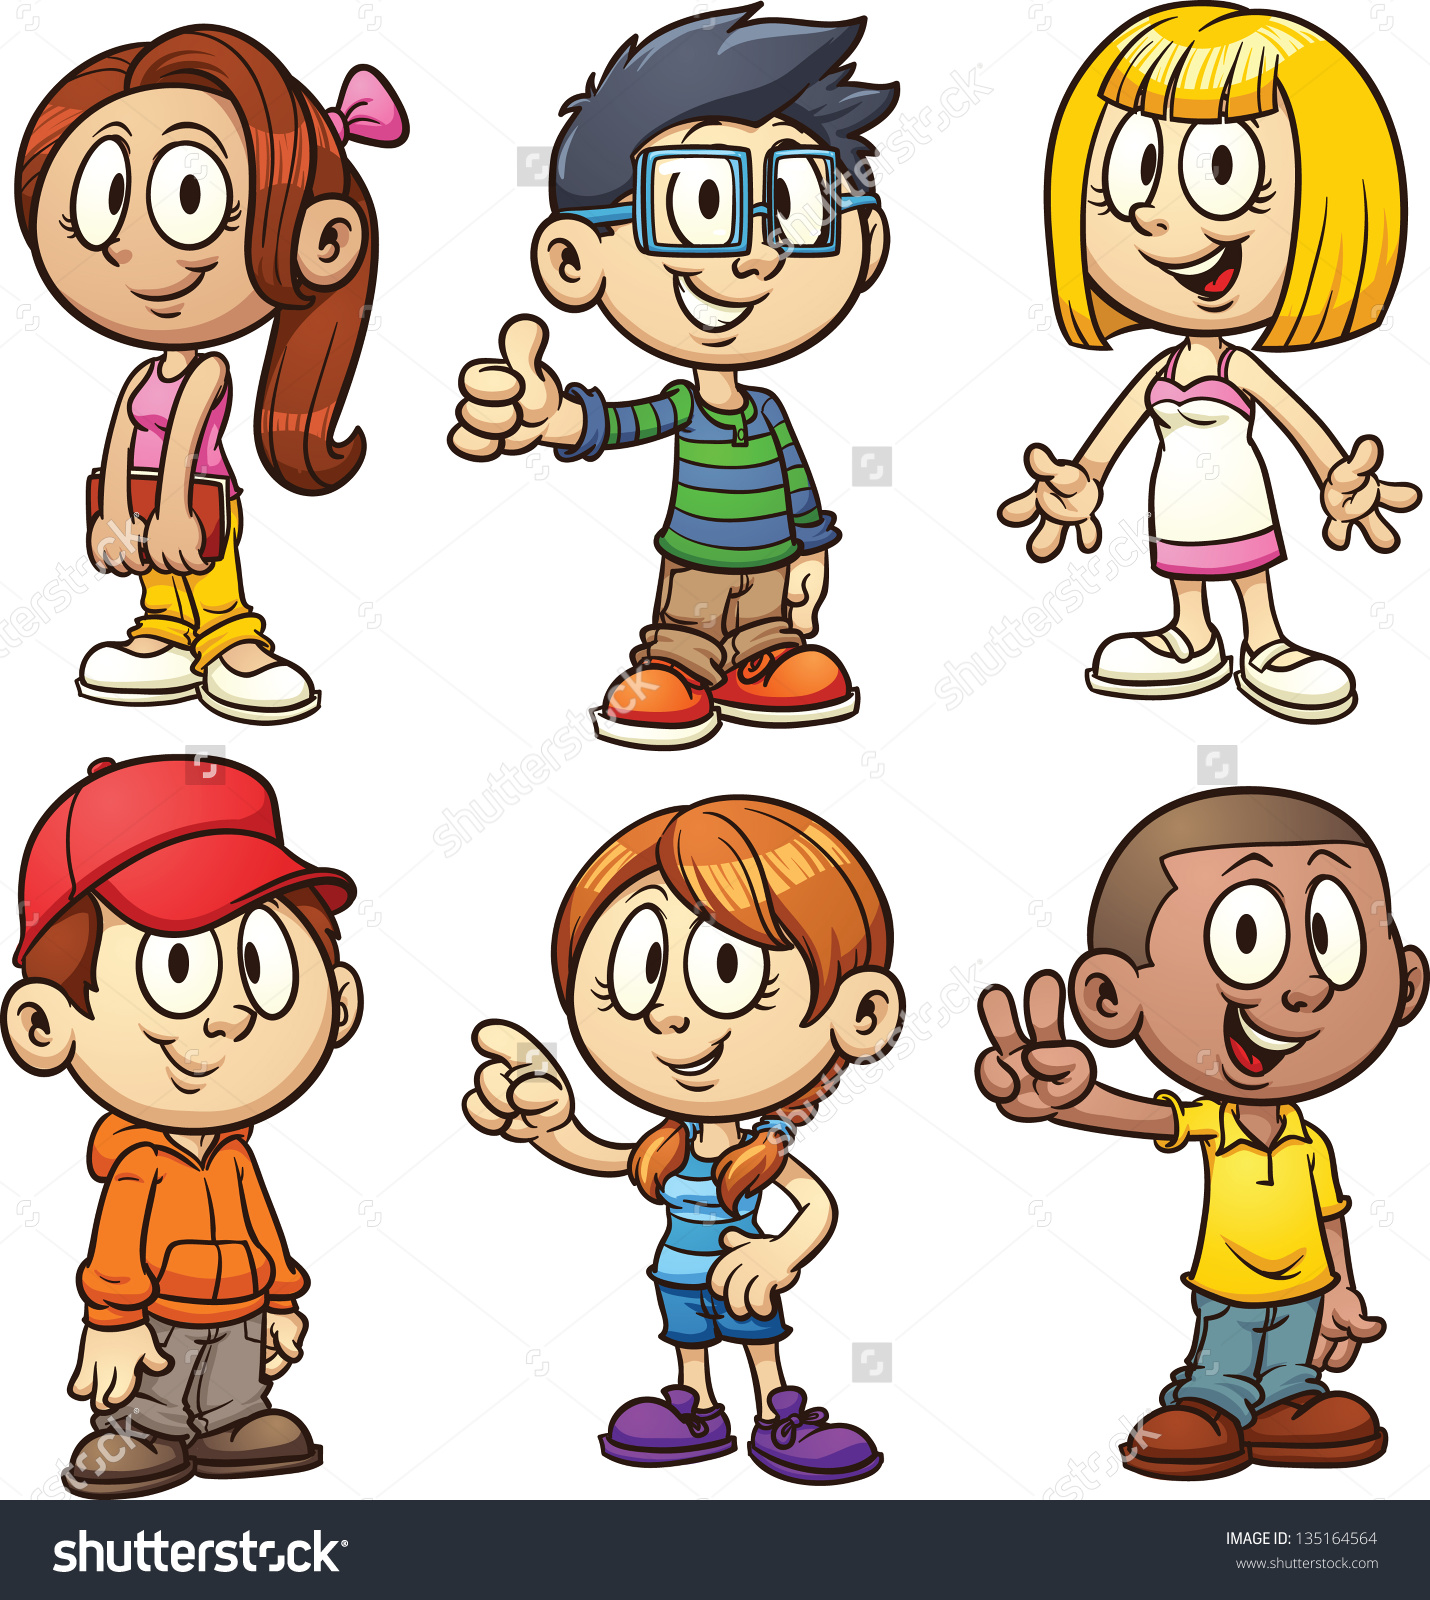 Cute expressions of kids clipart.